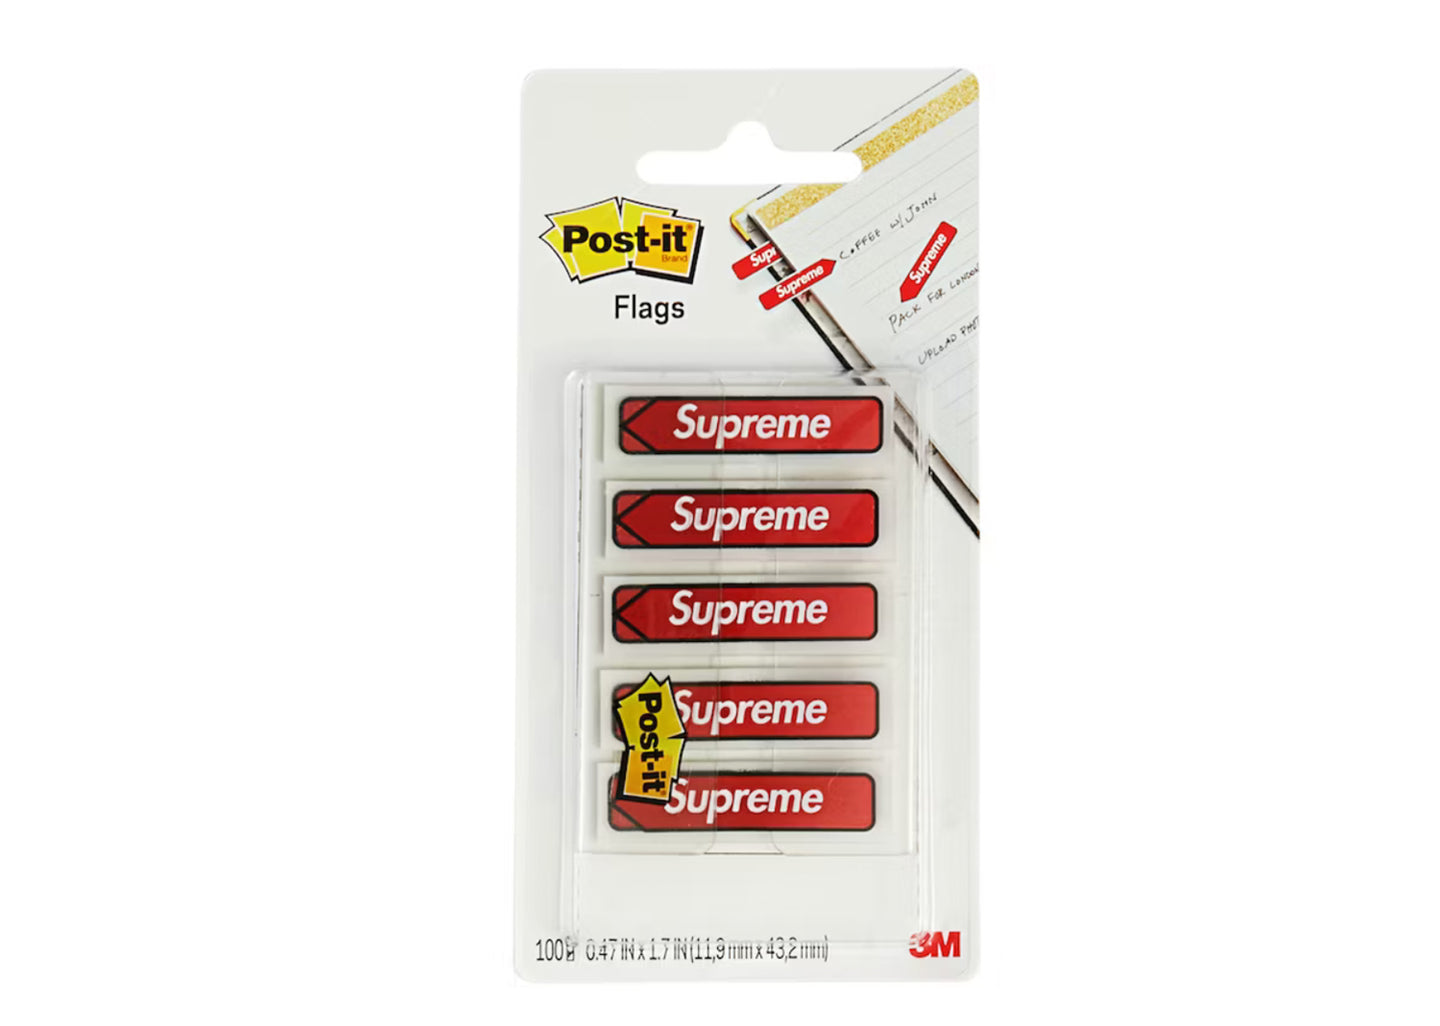 Supreme Post-It Flags